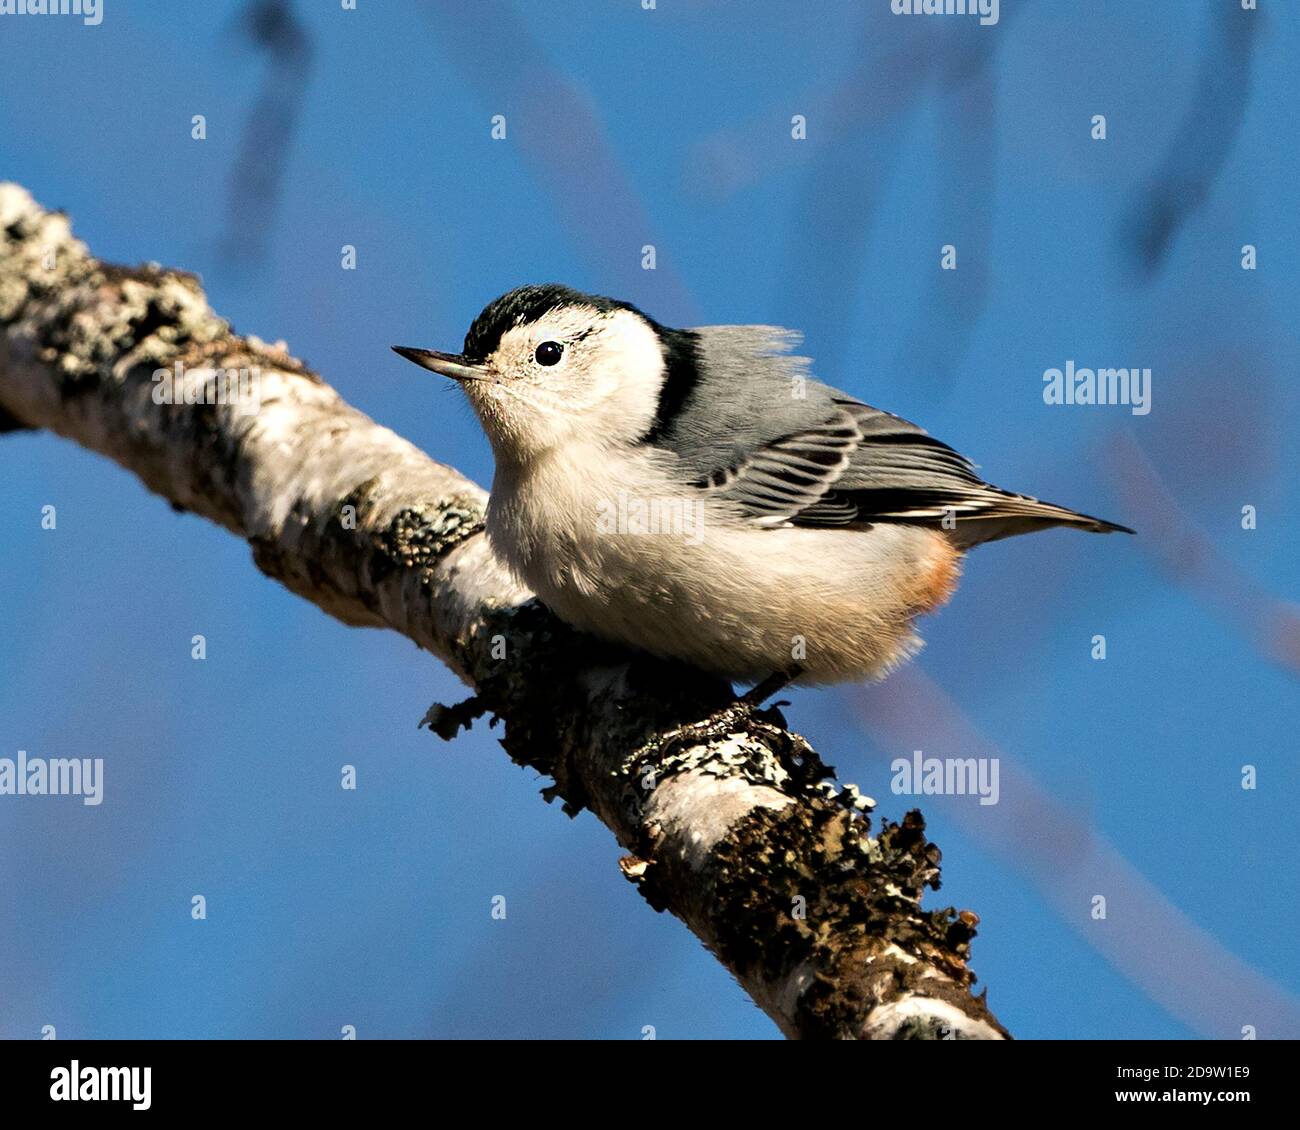 White-Breasted Nuthatch bird close-up profile view perched with a blue sky background in its environment and habitat displaying fluffy feather wings. Stock Photo